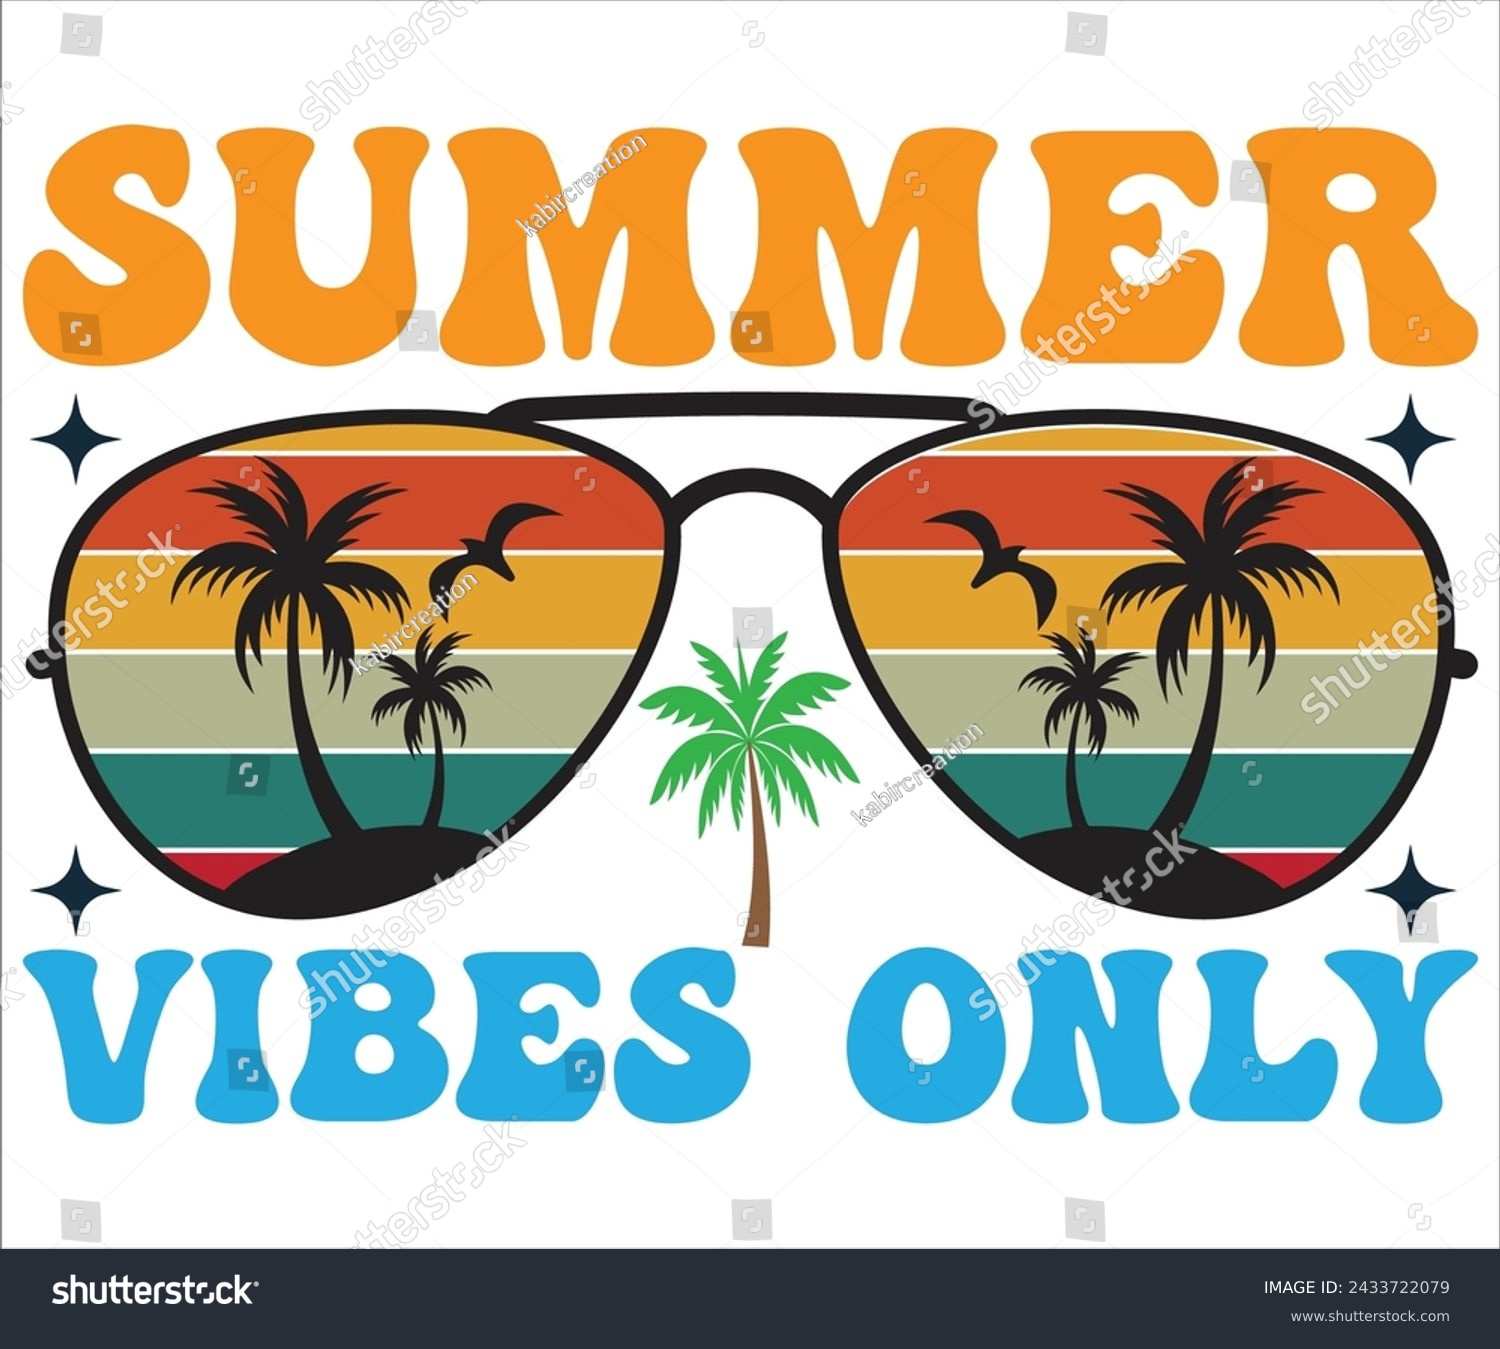 SVG of Summer Vibes Only T-shirt, Happy Summer Day T-shirt, Happy Summer Day svg,Hello Summer Svg,summer Beach Vibes Shirt, Vacation, Cut File for Cricut  svg